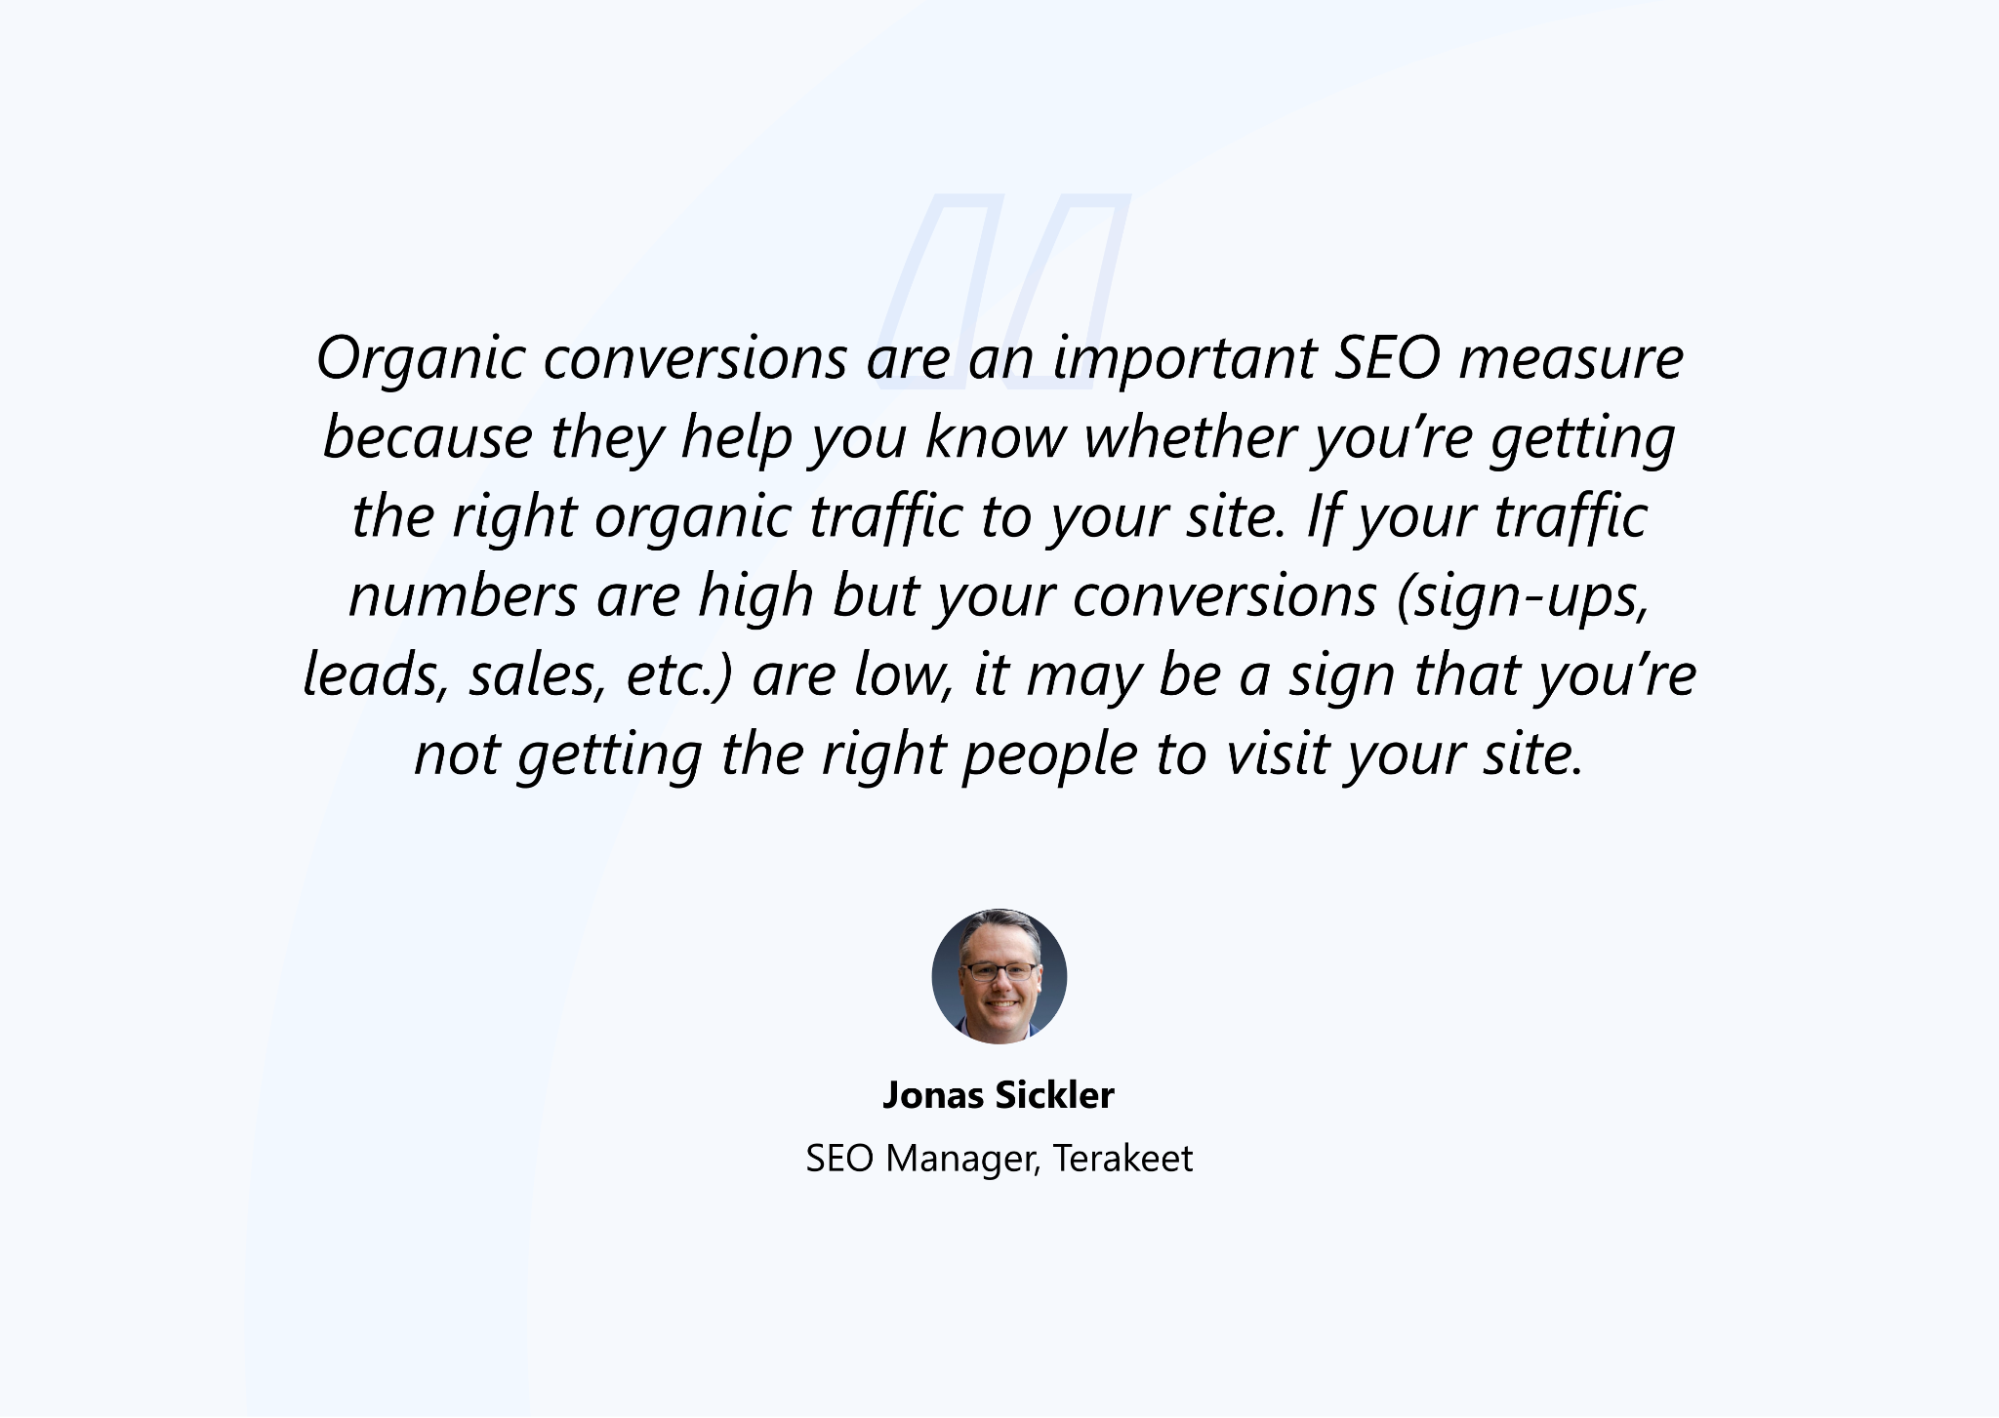 Jonas Sickler Opinion About Organic Conversions